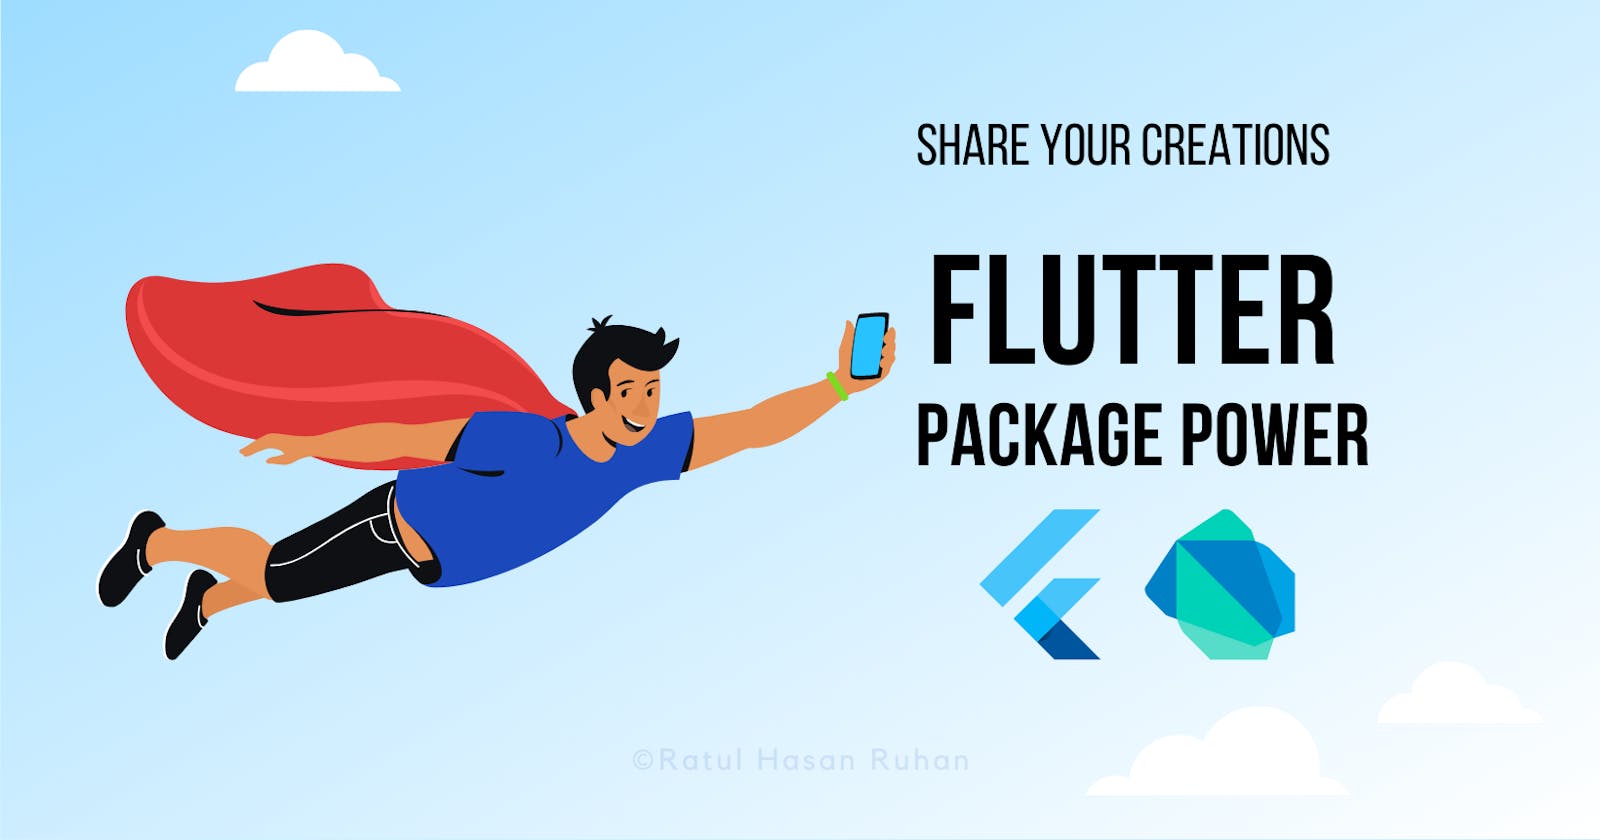 Flutter Package Power: Share Your Creations